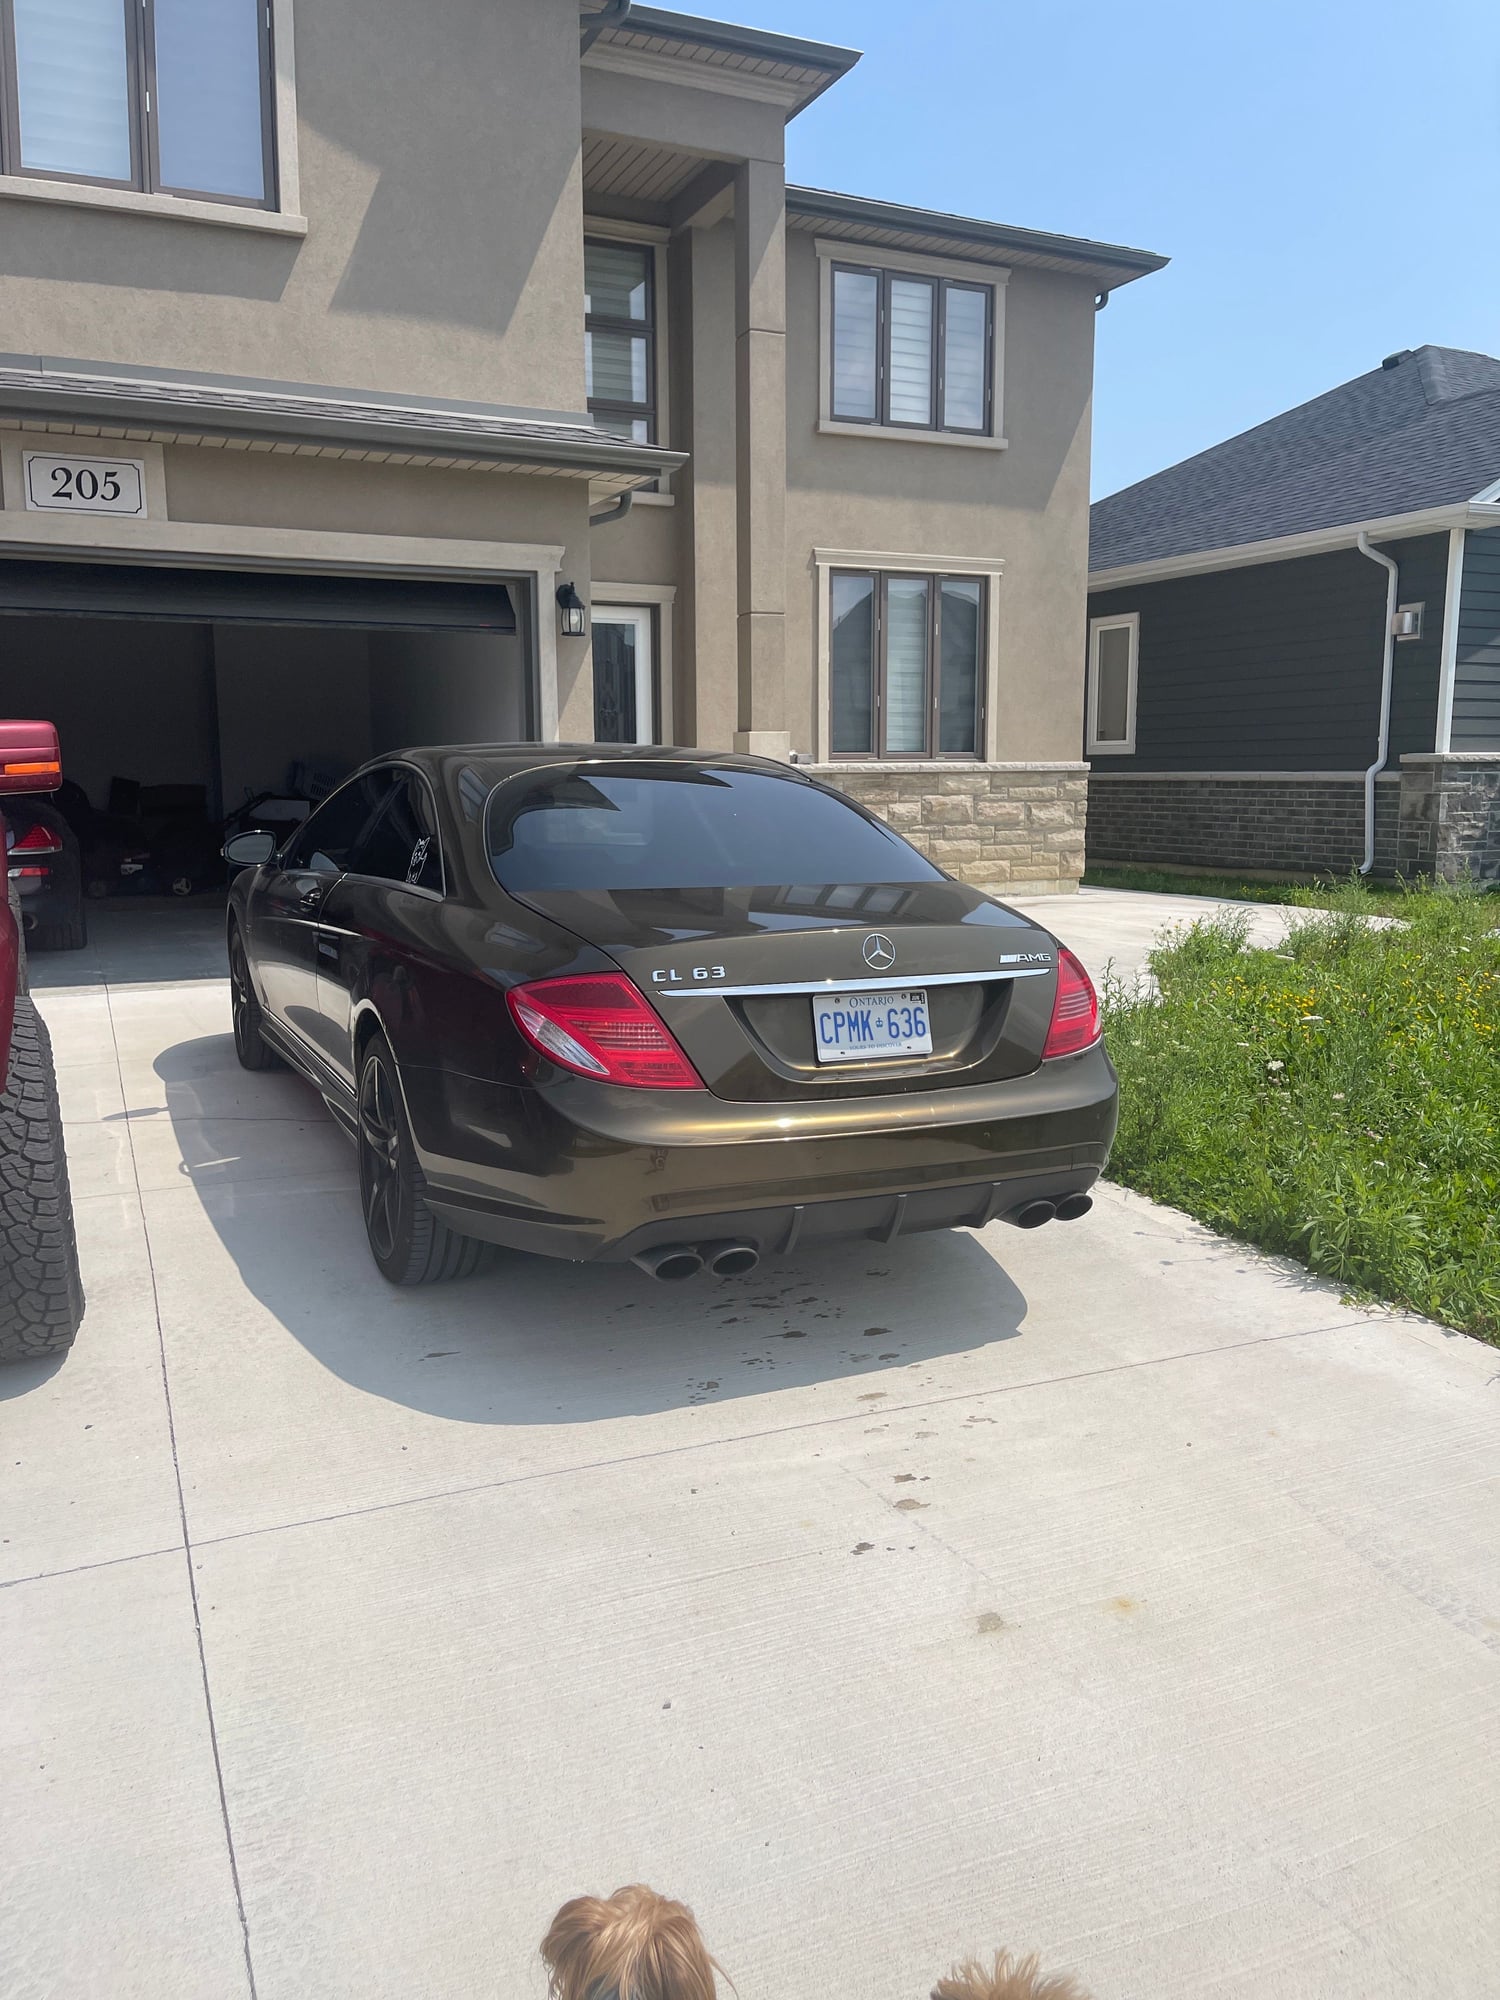 2009 Mercedes-Benz CL63 AMG - My high mile CL63, Whats it worth, taking offers! - Used - VIN WDDEJ77X69A021463 - 205 Miles - 8 cyl - 2WD - Automatic - Coupe - Brown - Belle River, ON N7S3L8, Canada